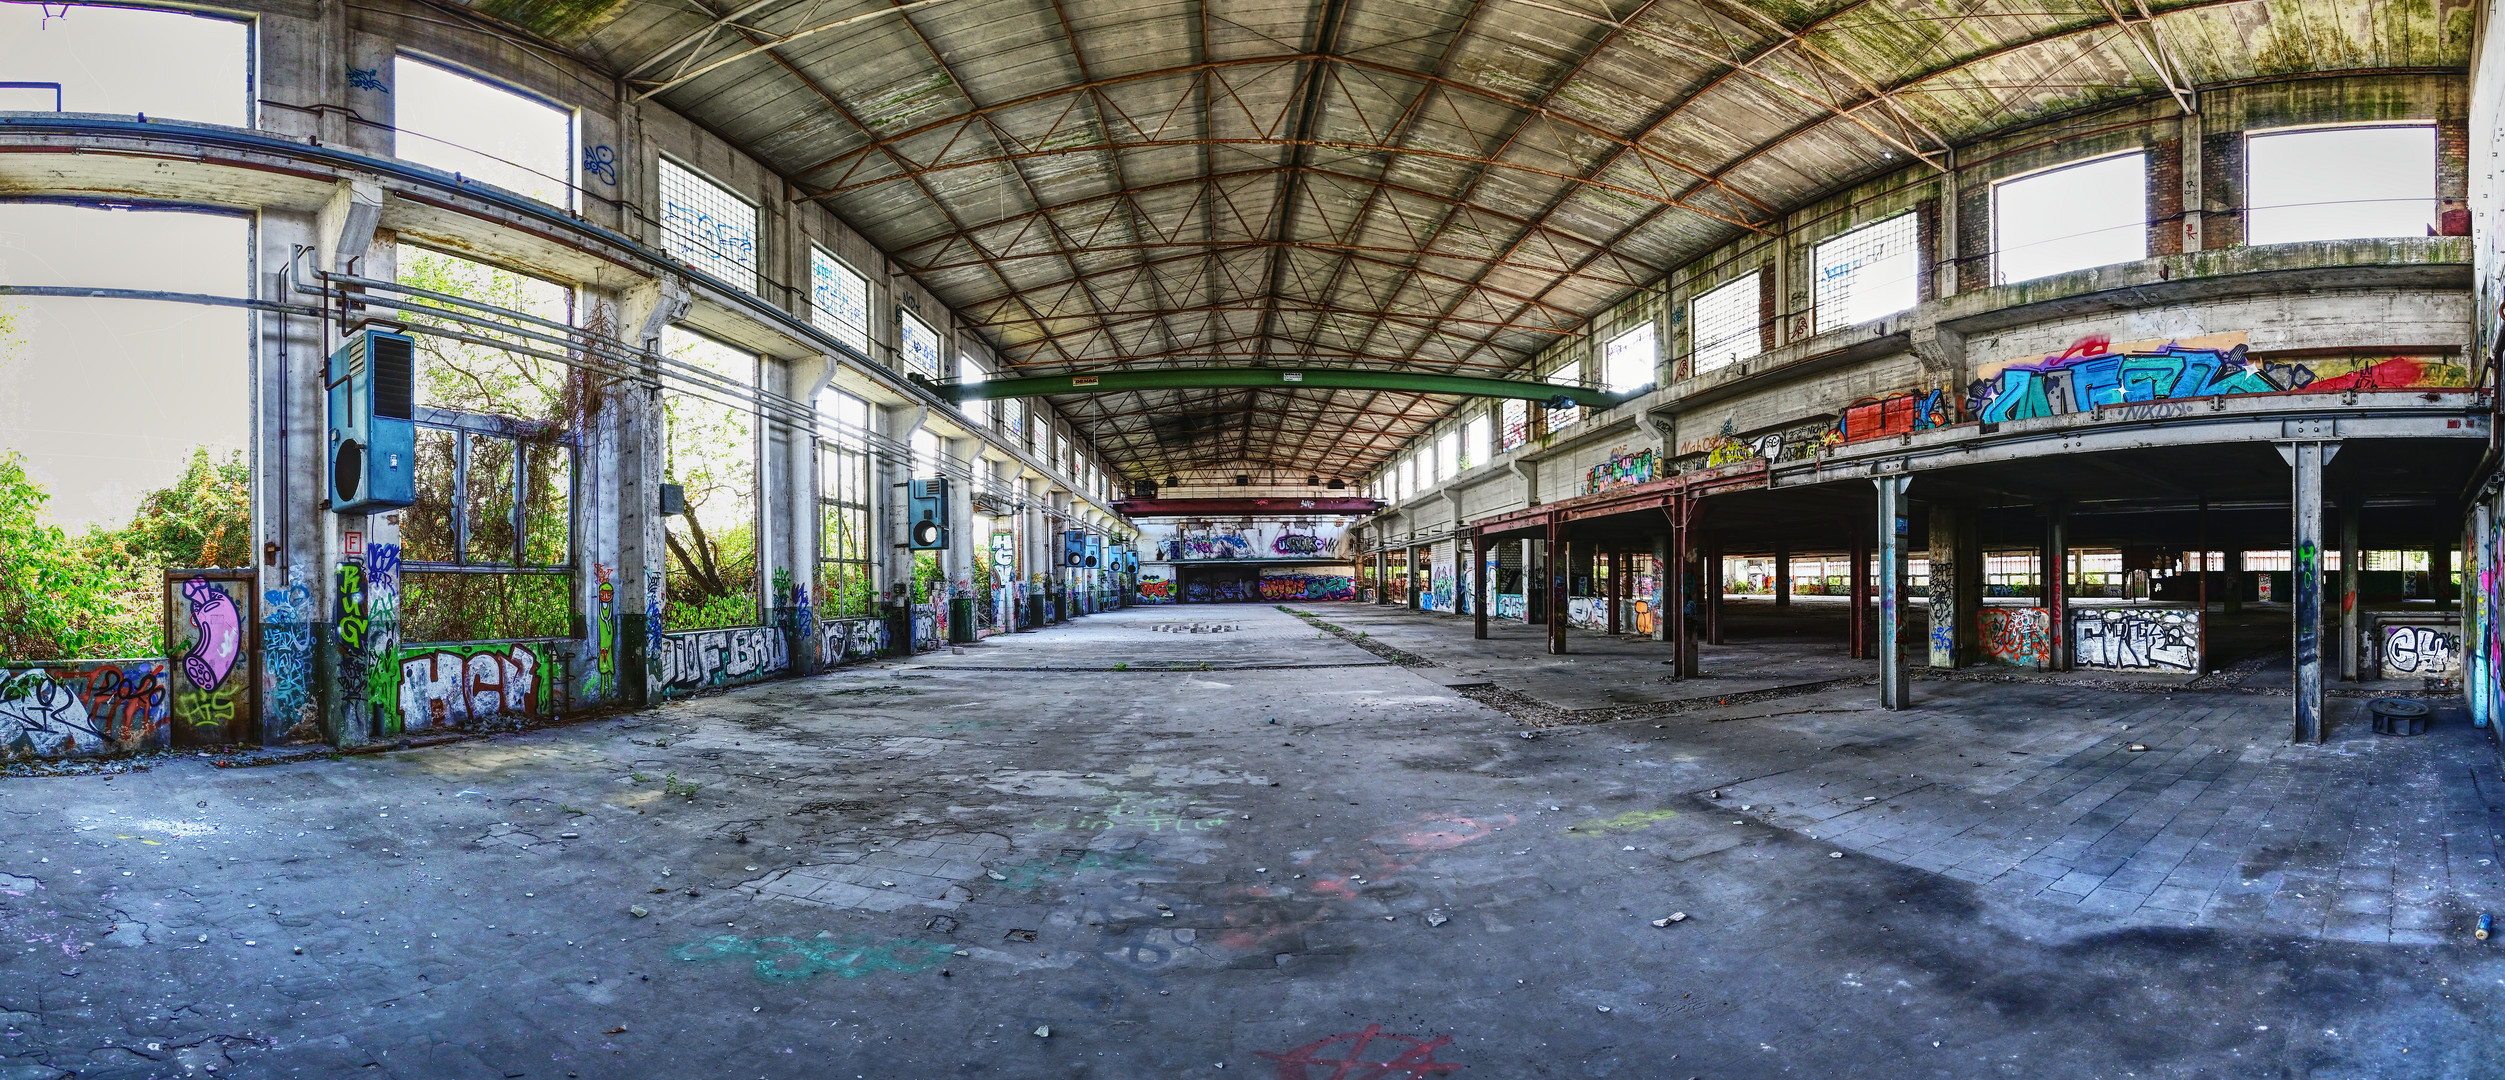 Lost Place  Panorama